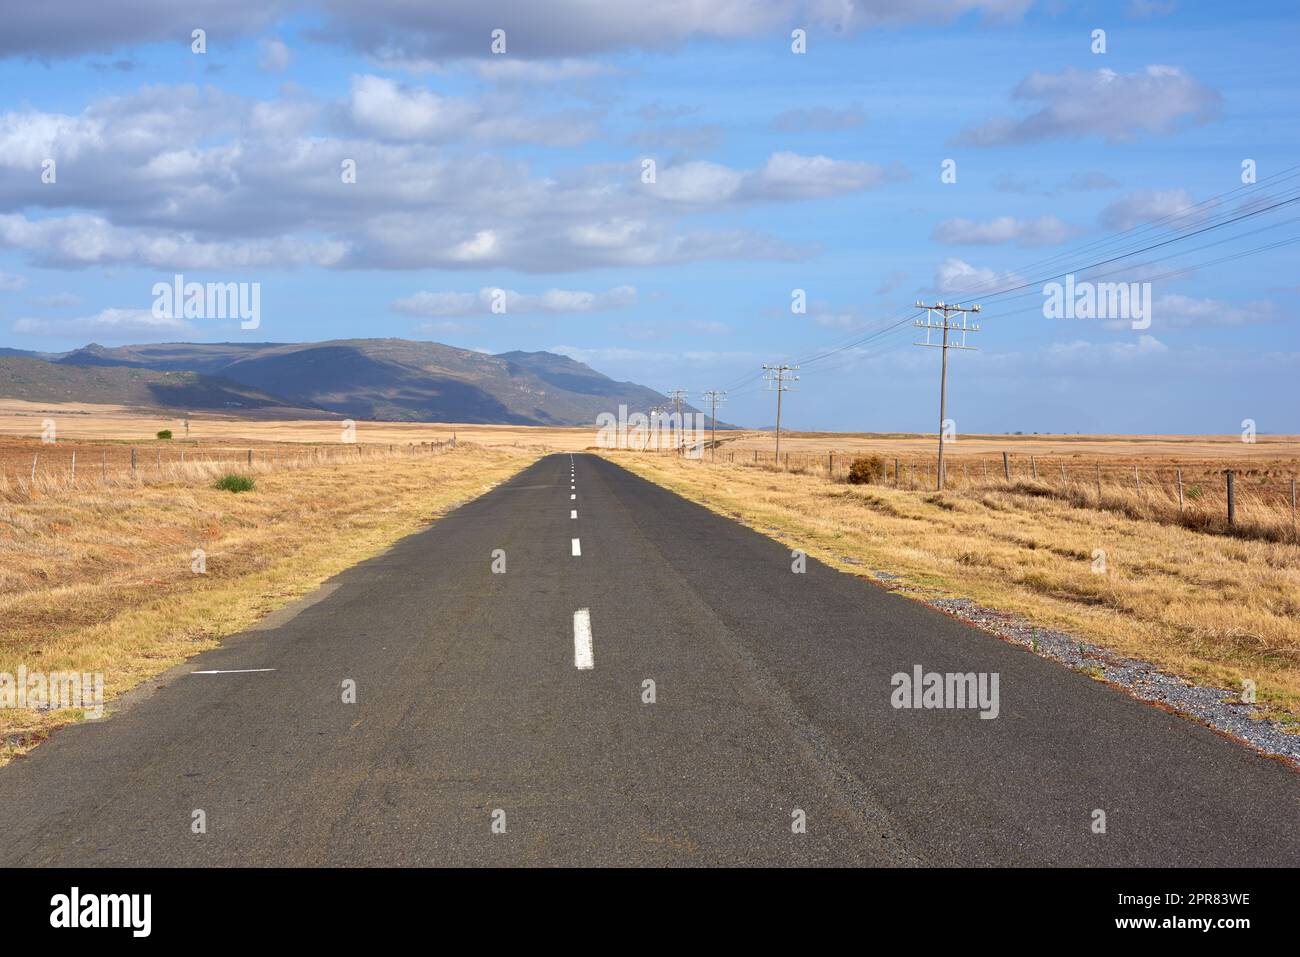 Landscape of tar road leading past freshly harvested farm in Western Cape, South Africa. Blue sky, scenic rural countryside street of ploughed agricultural field. Travel to sustainable grain pasture Stock Photo